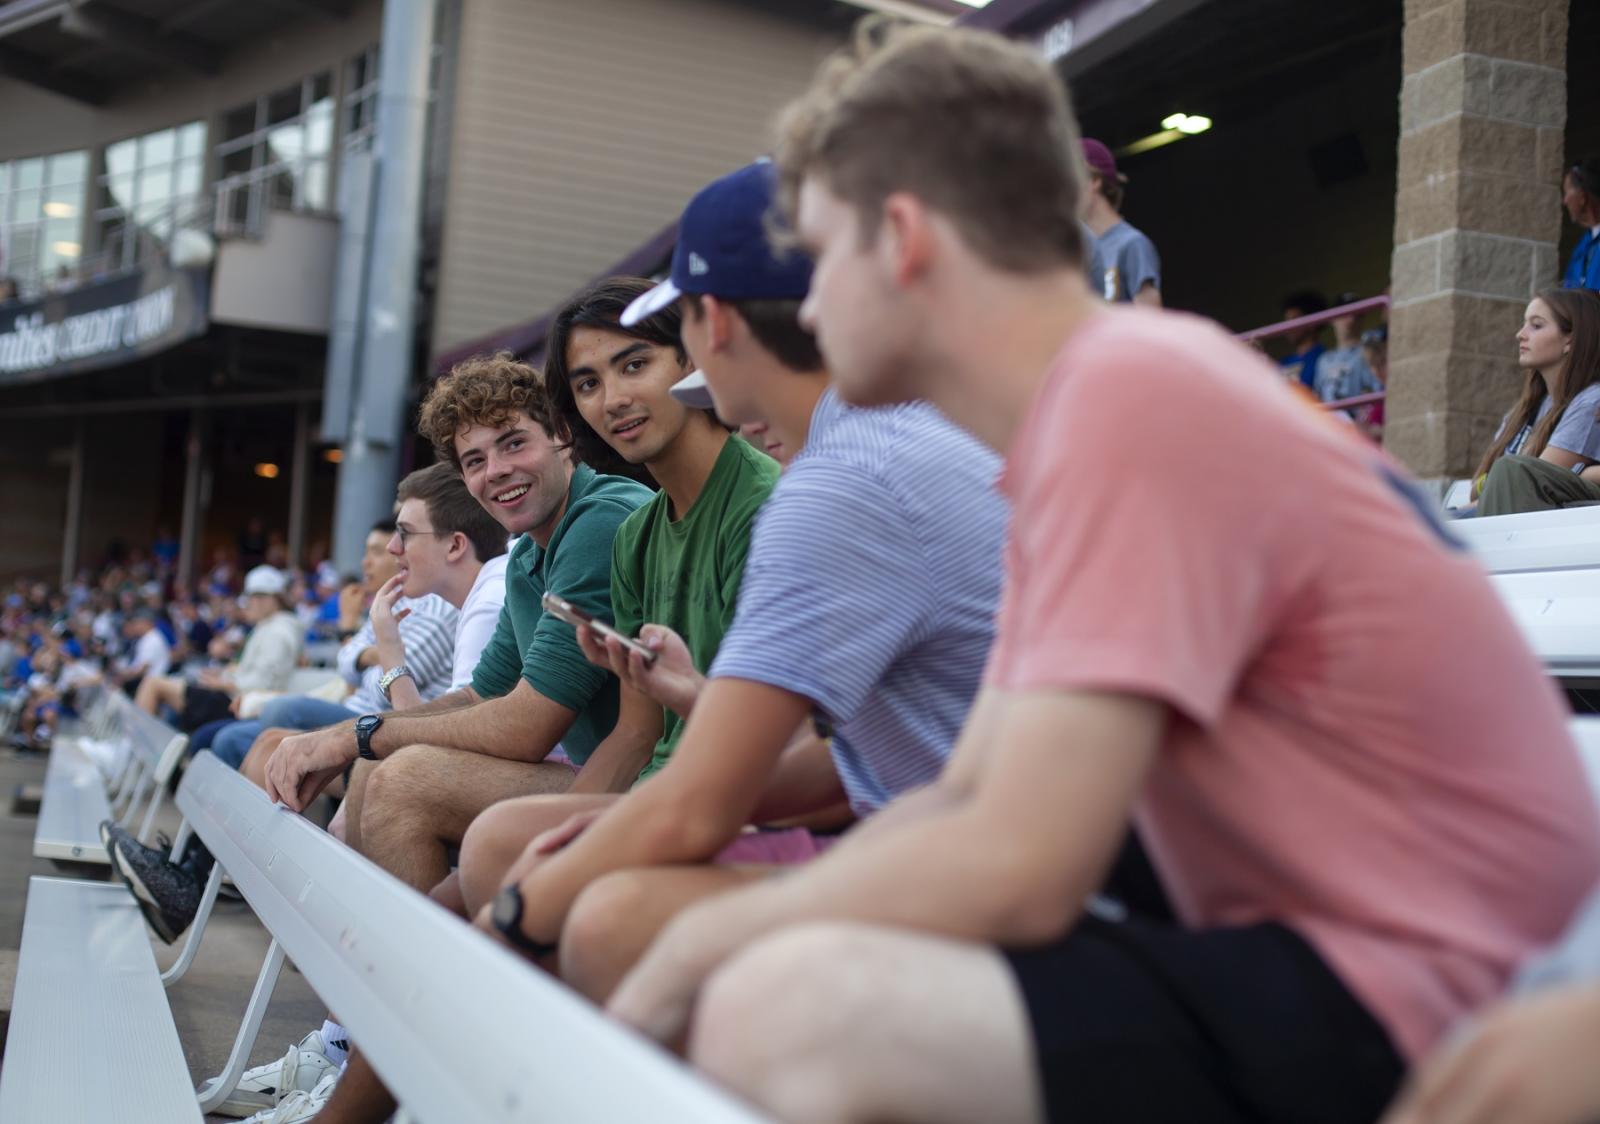 Lawrence students enjoy a Wisconsin Timber Rattlers game at Fox Cities Stadium. (Photo by Danny Damiani)